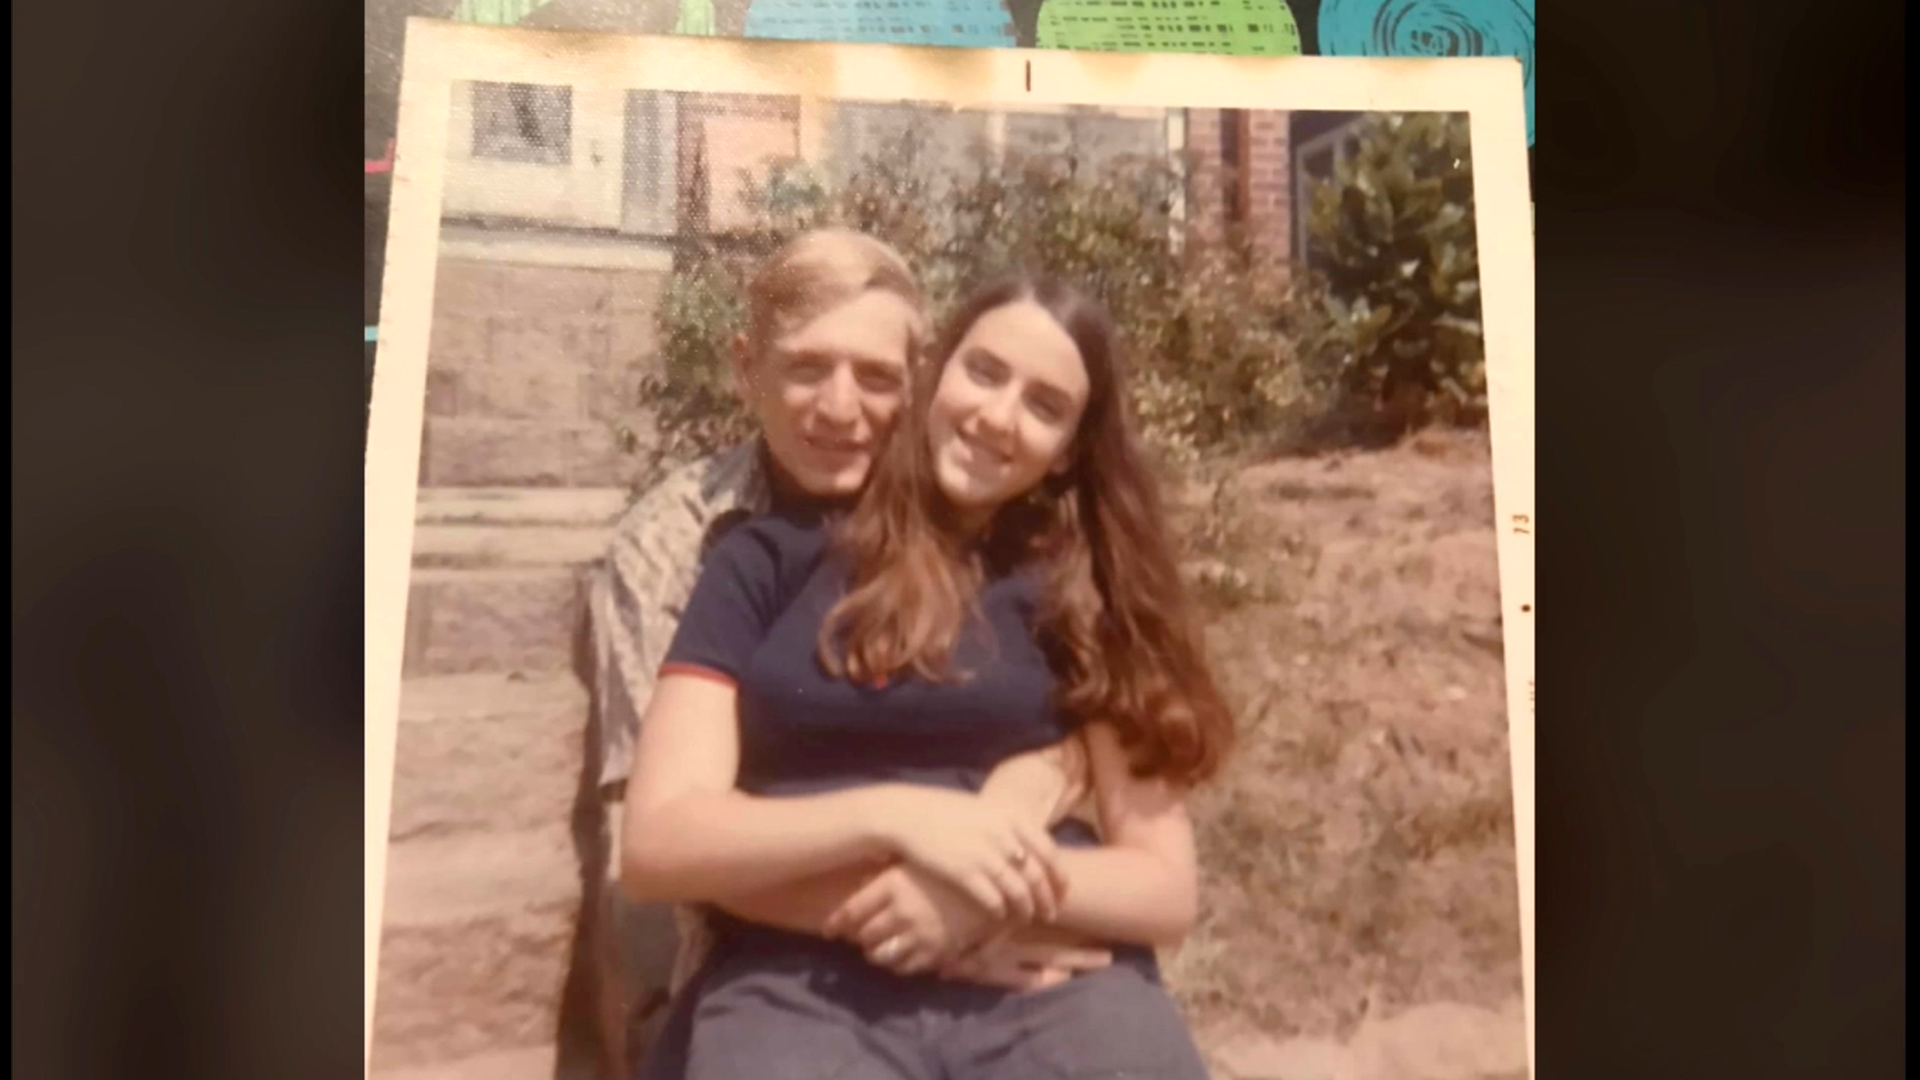 A Rowan County husband and wife both died from coronavirus, but their love took them together. Johnny and Cathy Peoples were married for 48 years.